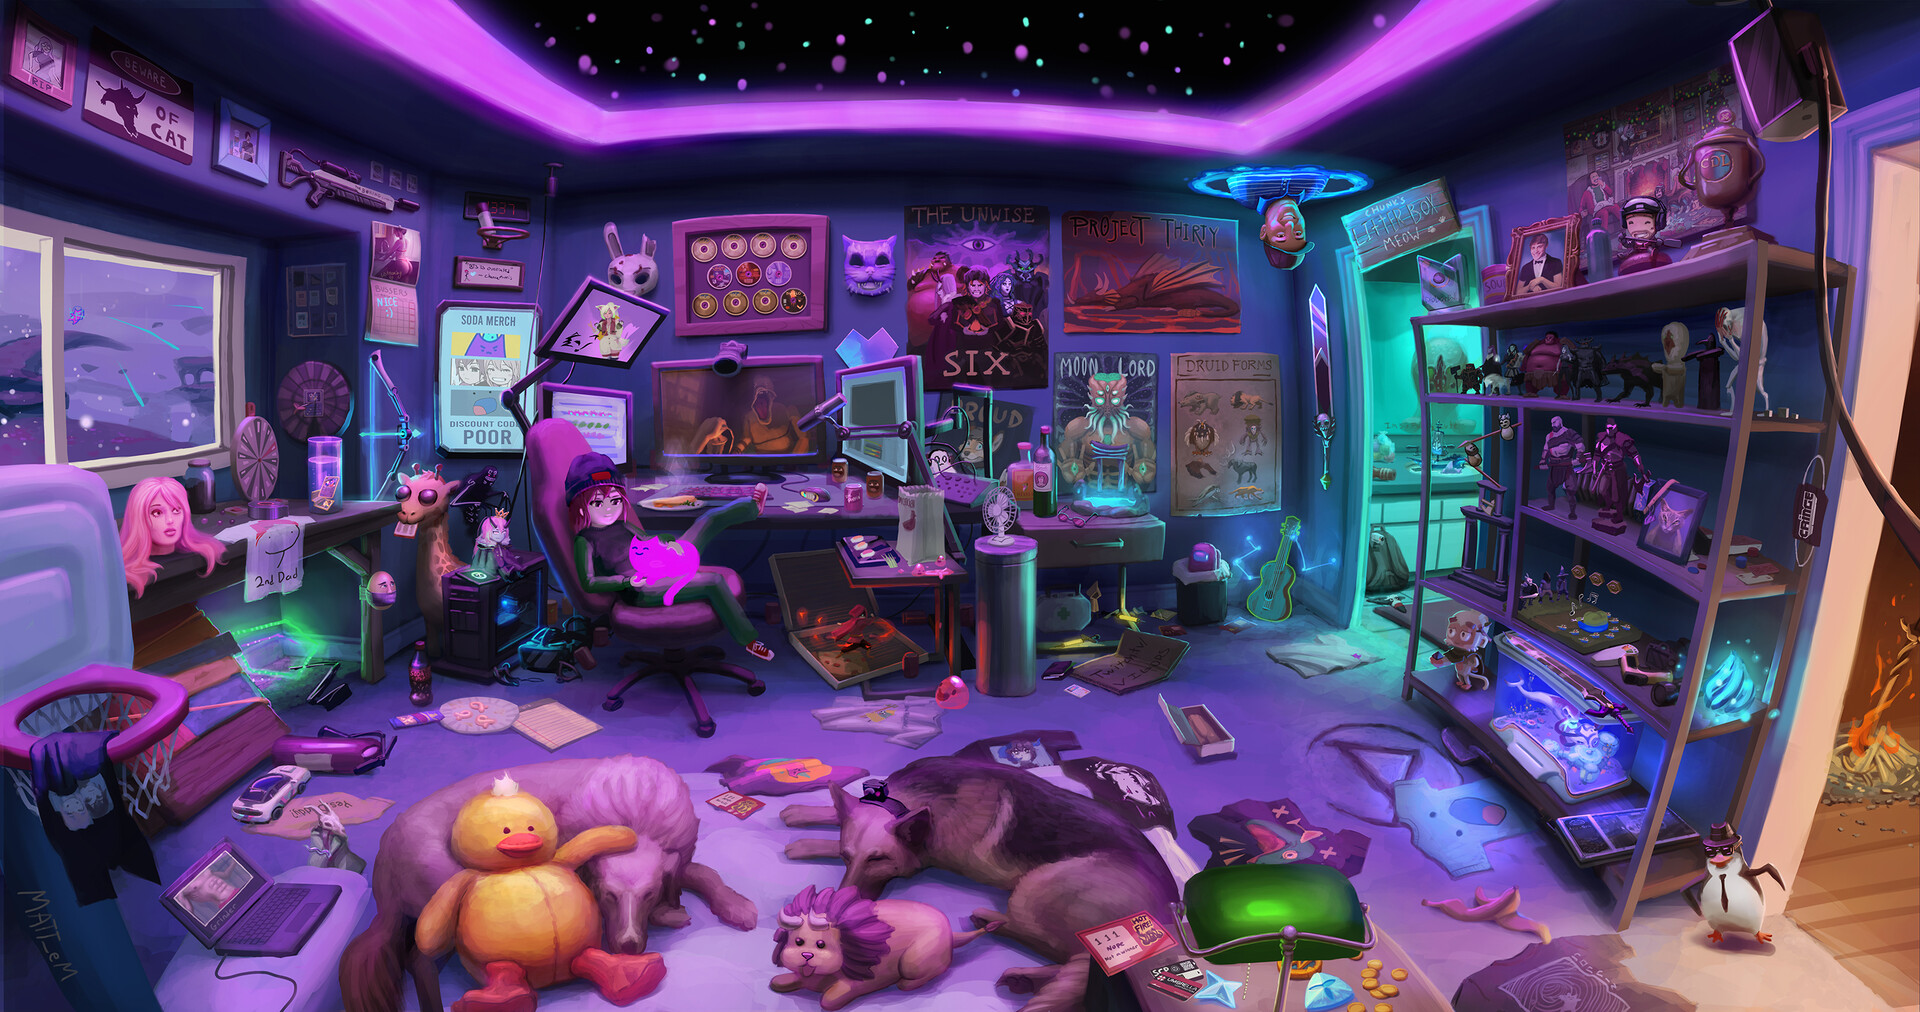 General 1920x1012 room futuristic ceiling space anime girls computer neon purple background purple light purple gaming chair